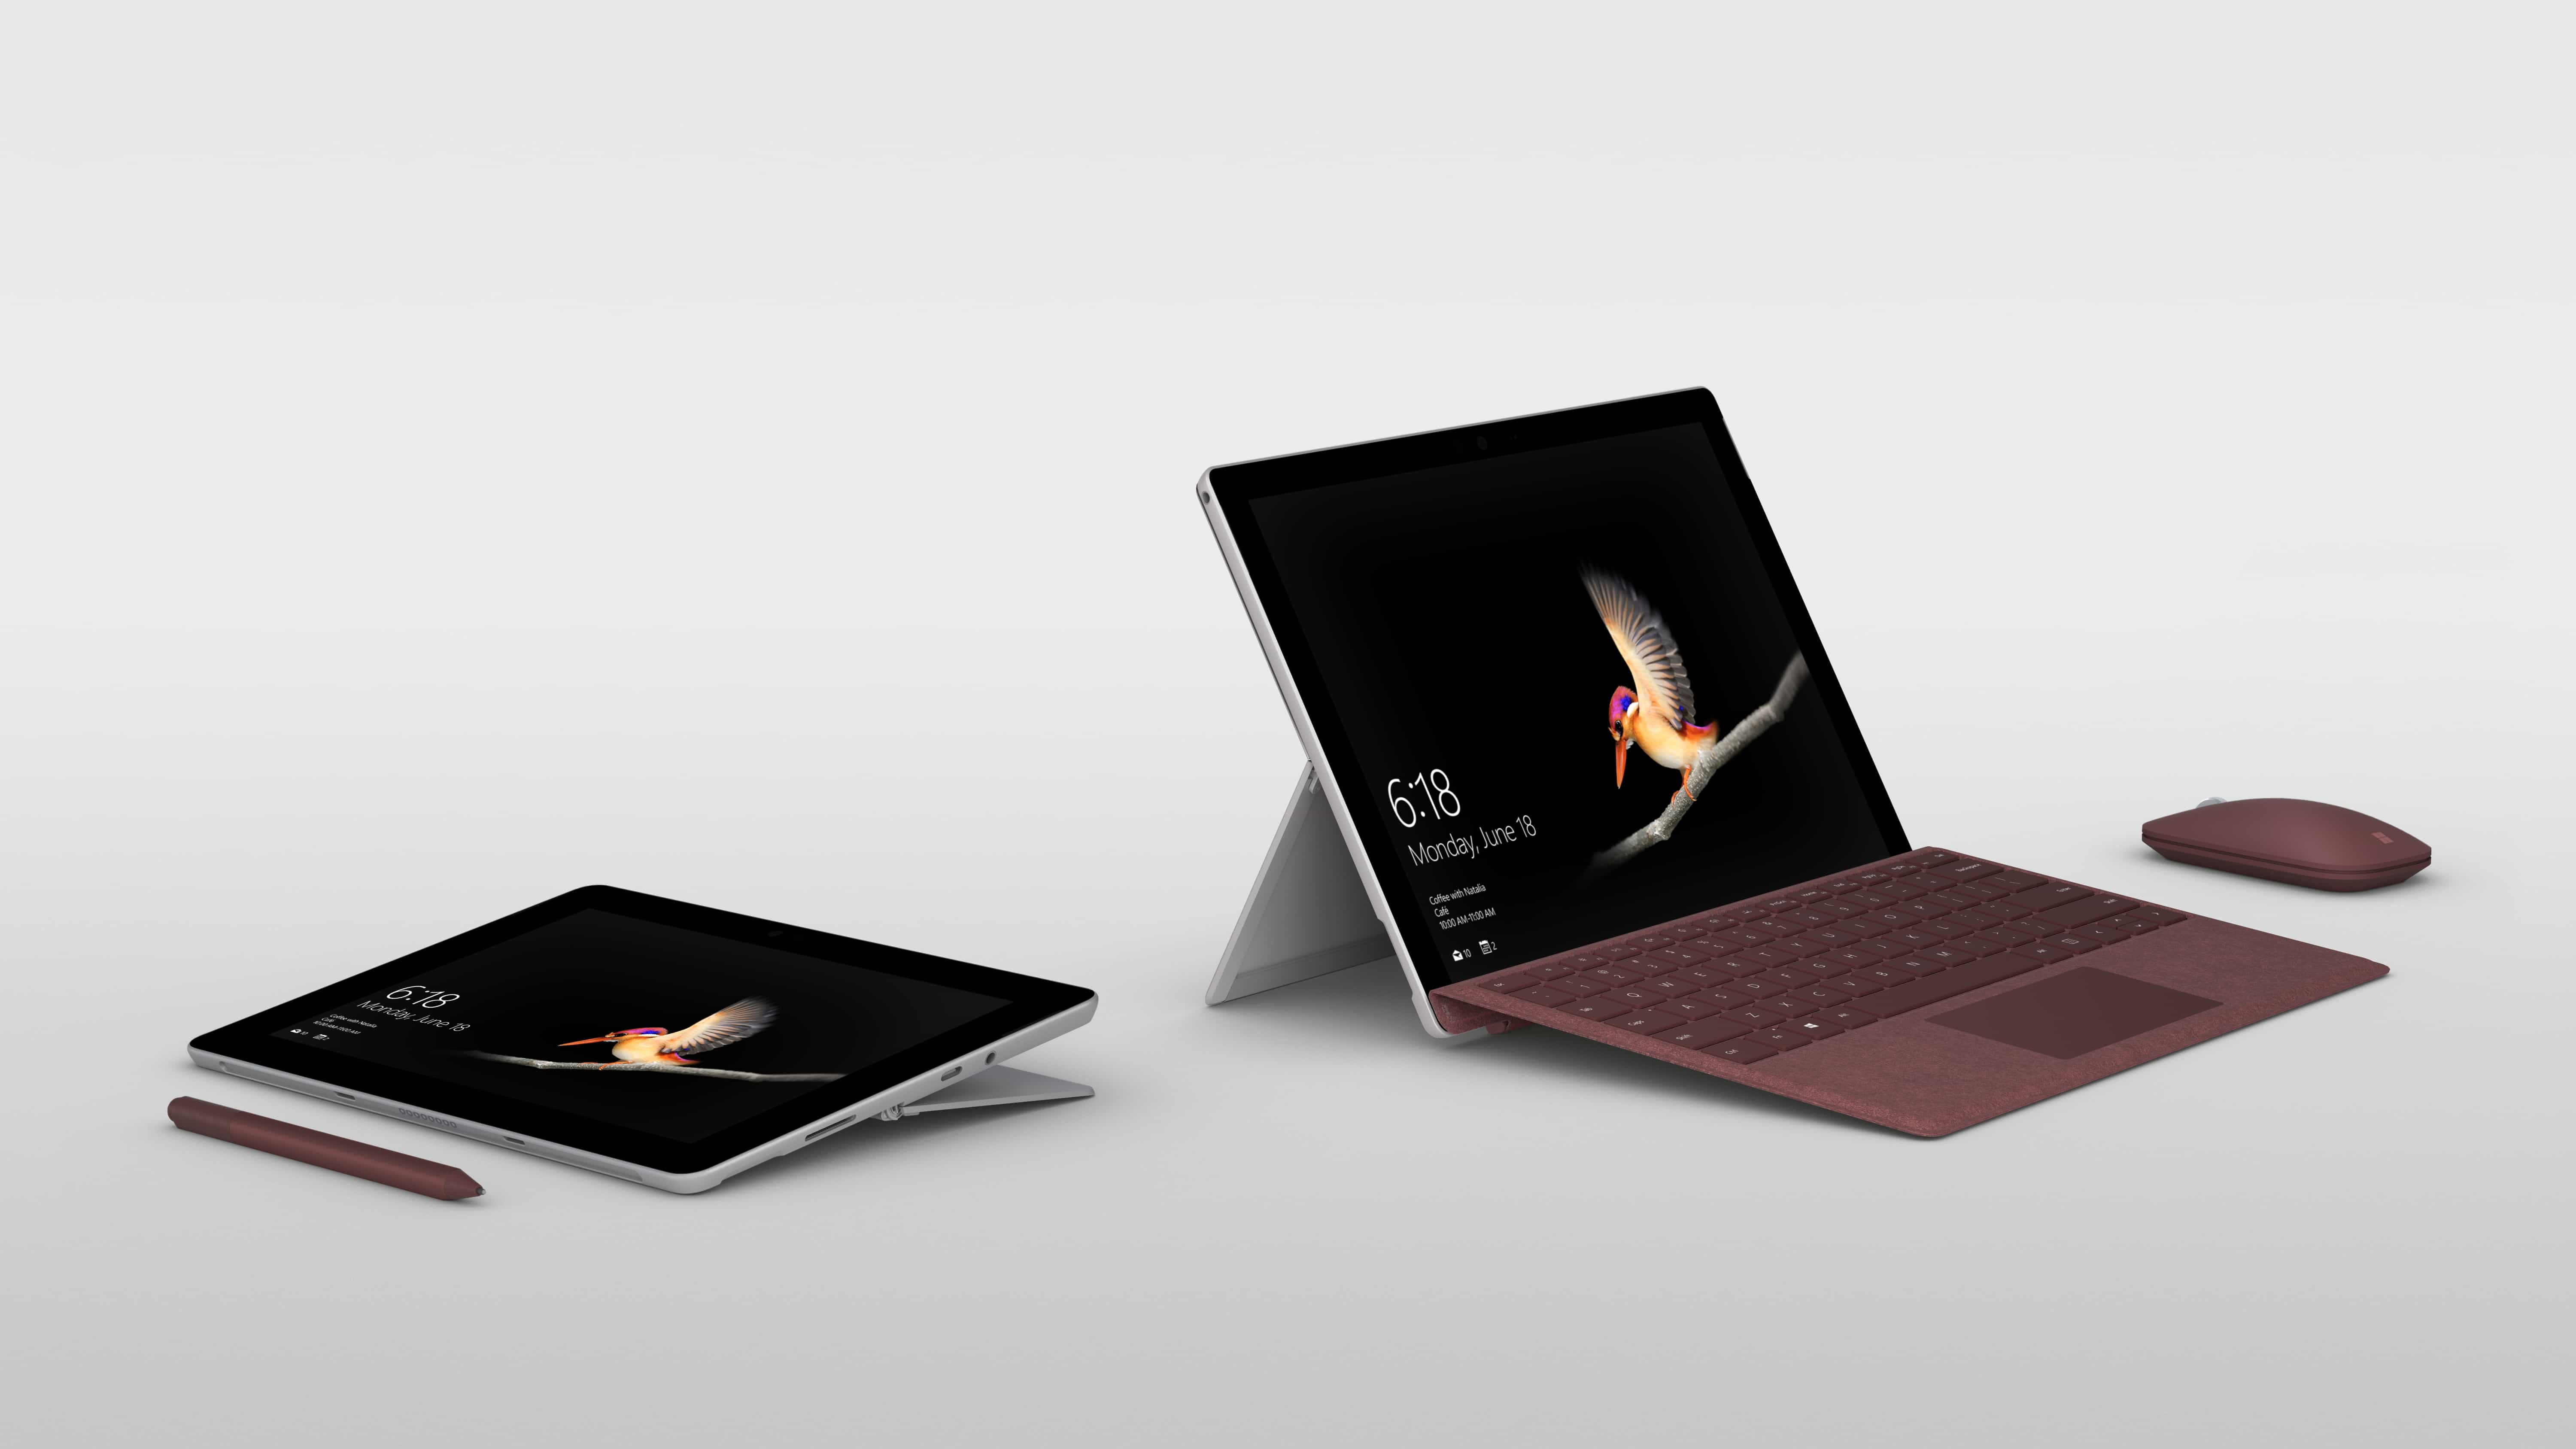 Microsoft - Surface Go - Type Cover - Mouse